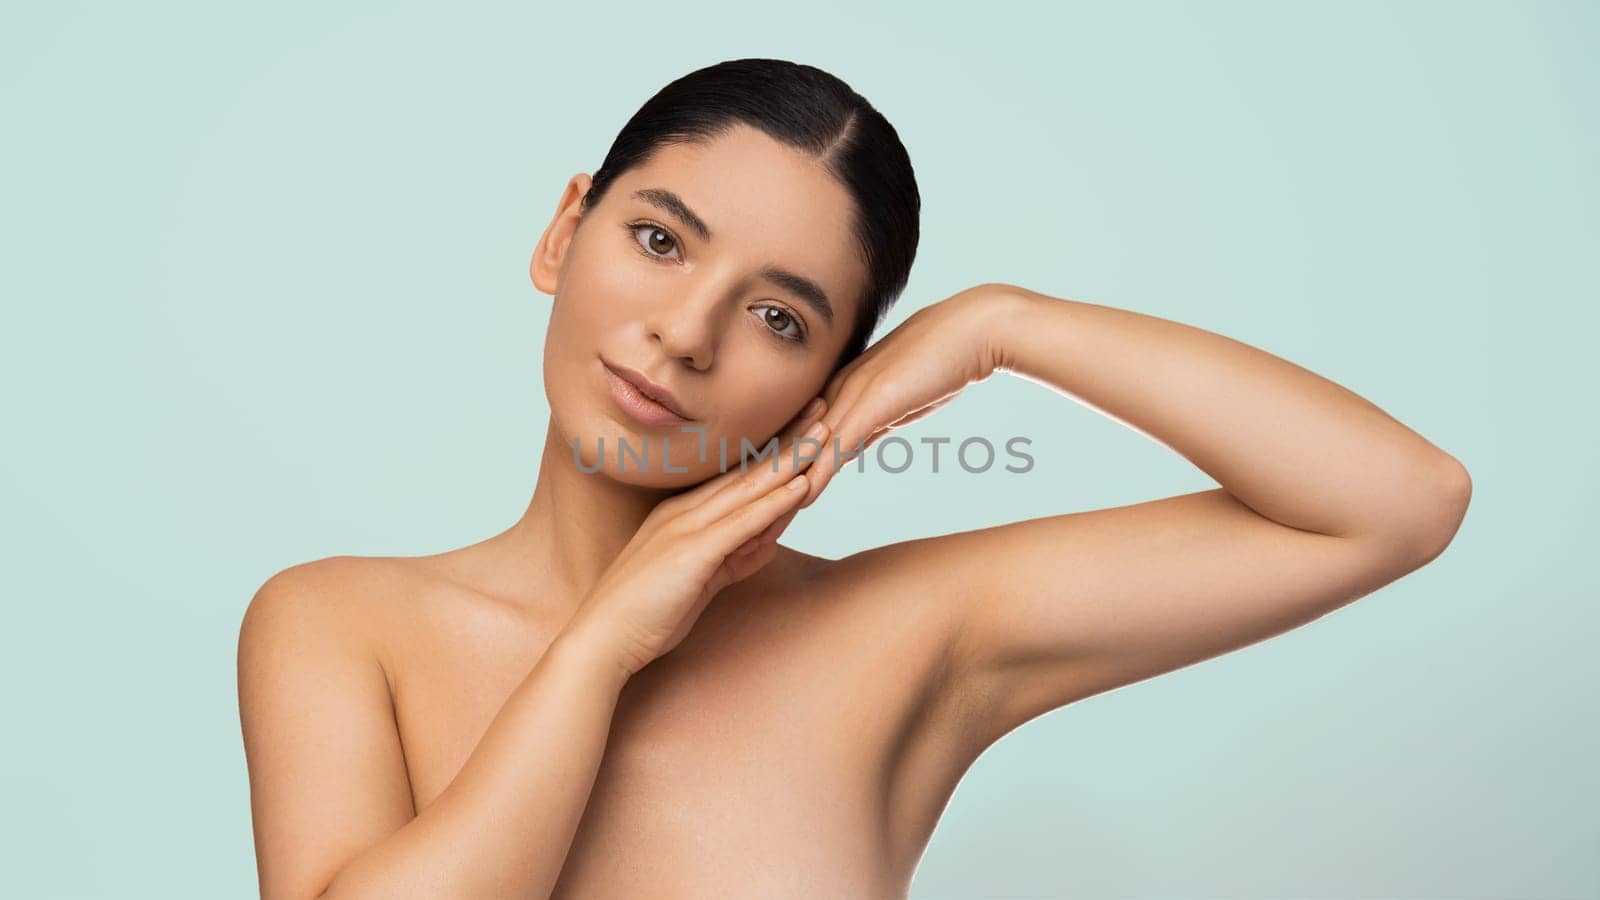 Glamorous natural beauty headshot portrait of a beautiful multiracial Turkish woman with perfect moisturized healthy skin and charming smile naked shoulders.